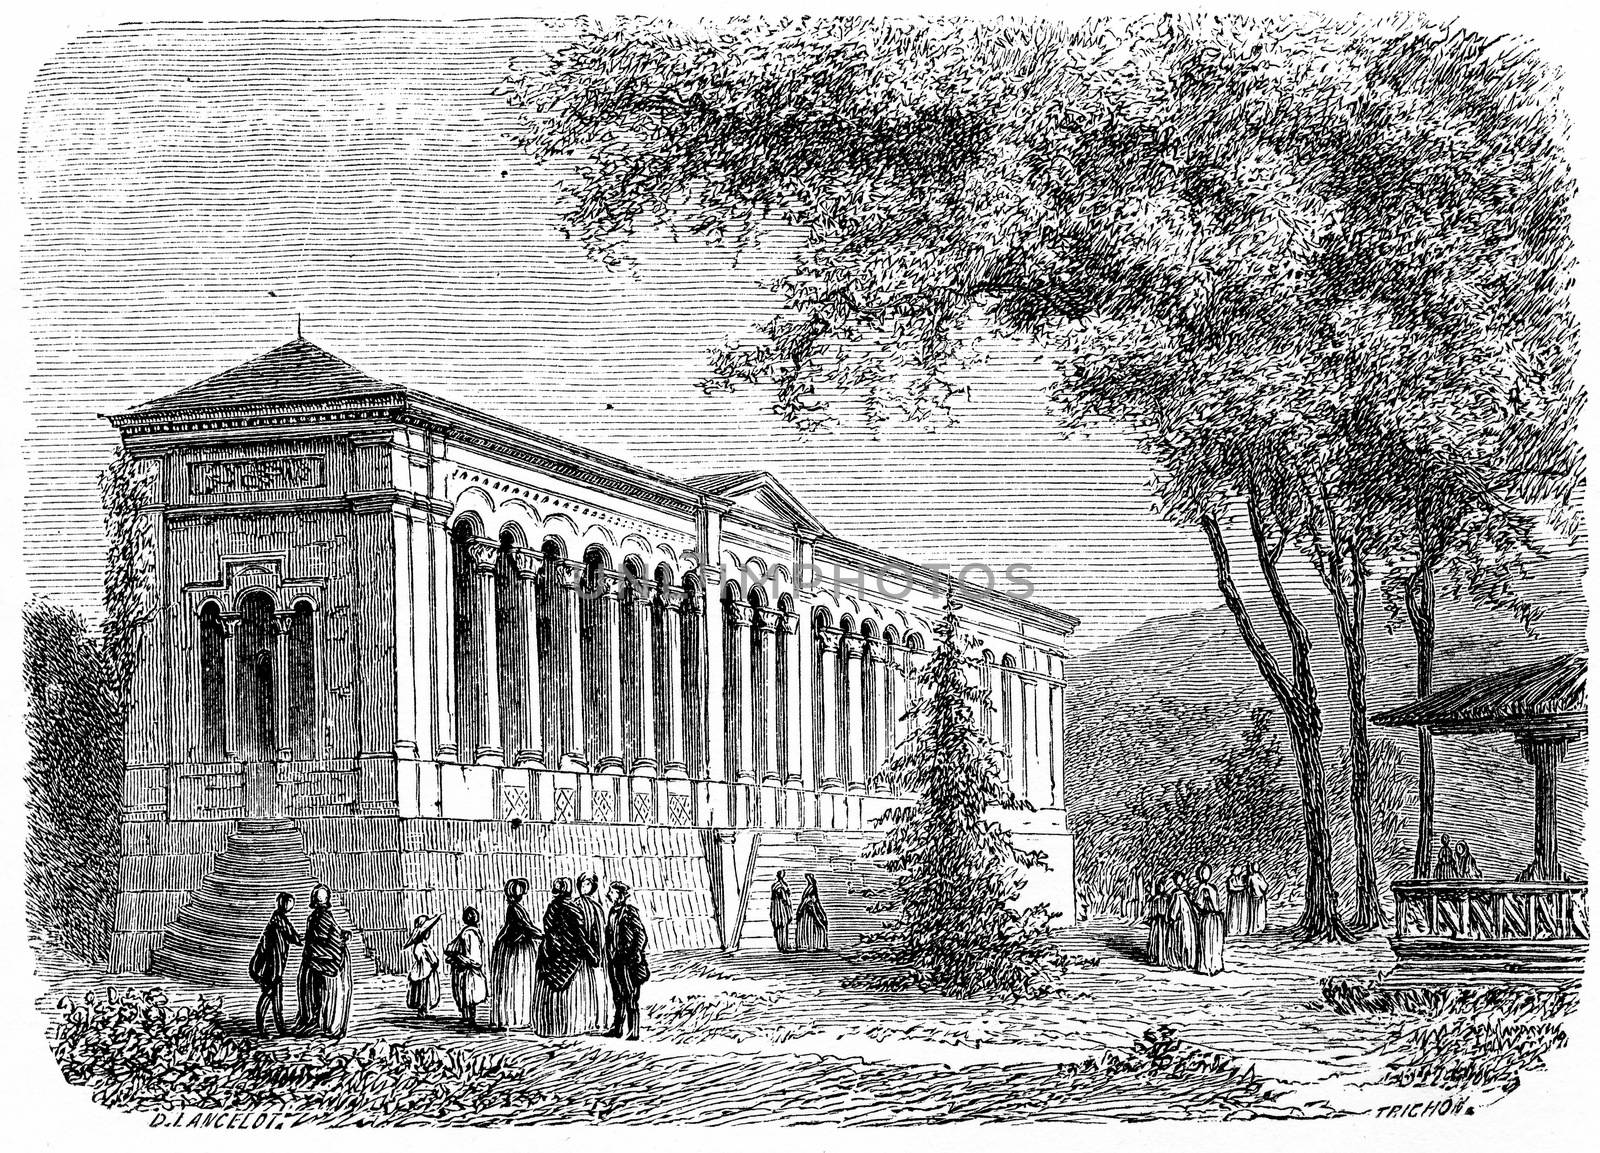 Trinkhalle, vintage engraved illustration. From Chemin des Ecoliers, 1861.
